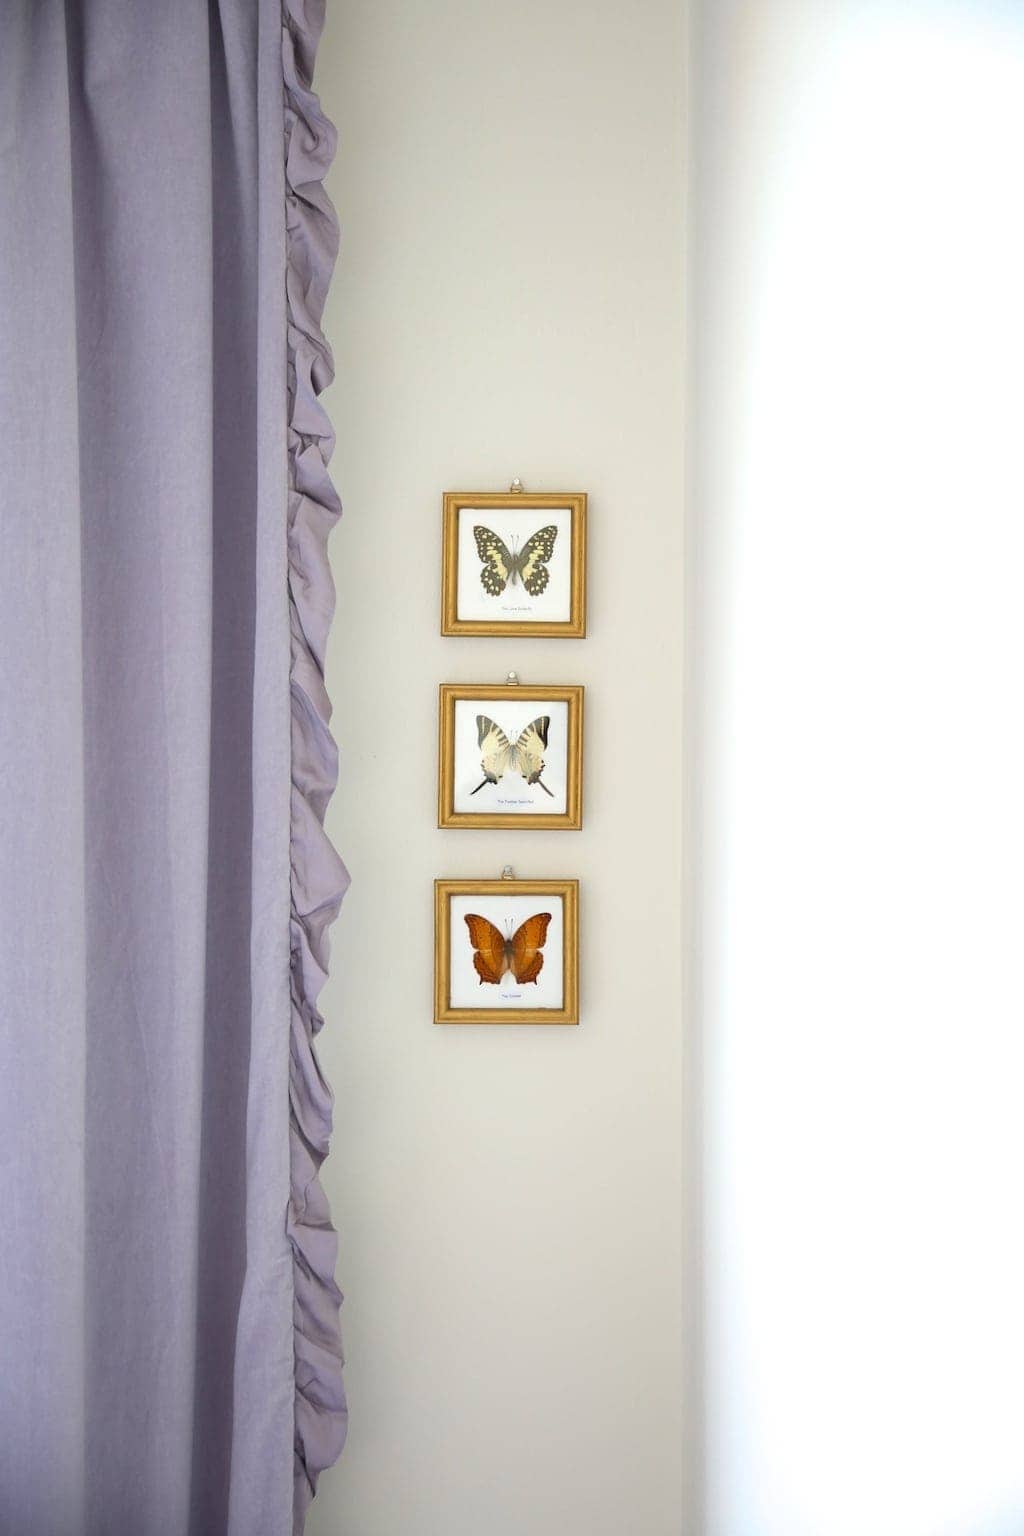 Three small butterflies framed in frames that are aged gold with rub n buff, next to a lavender curtain panel.